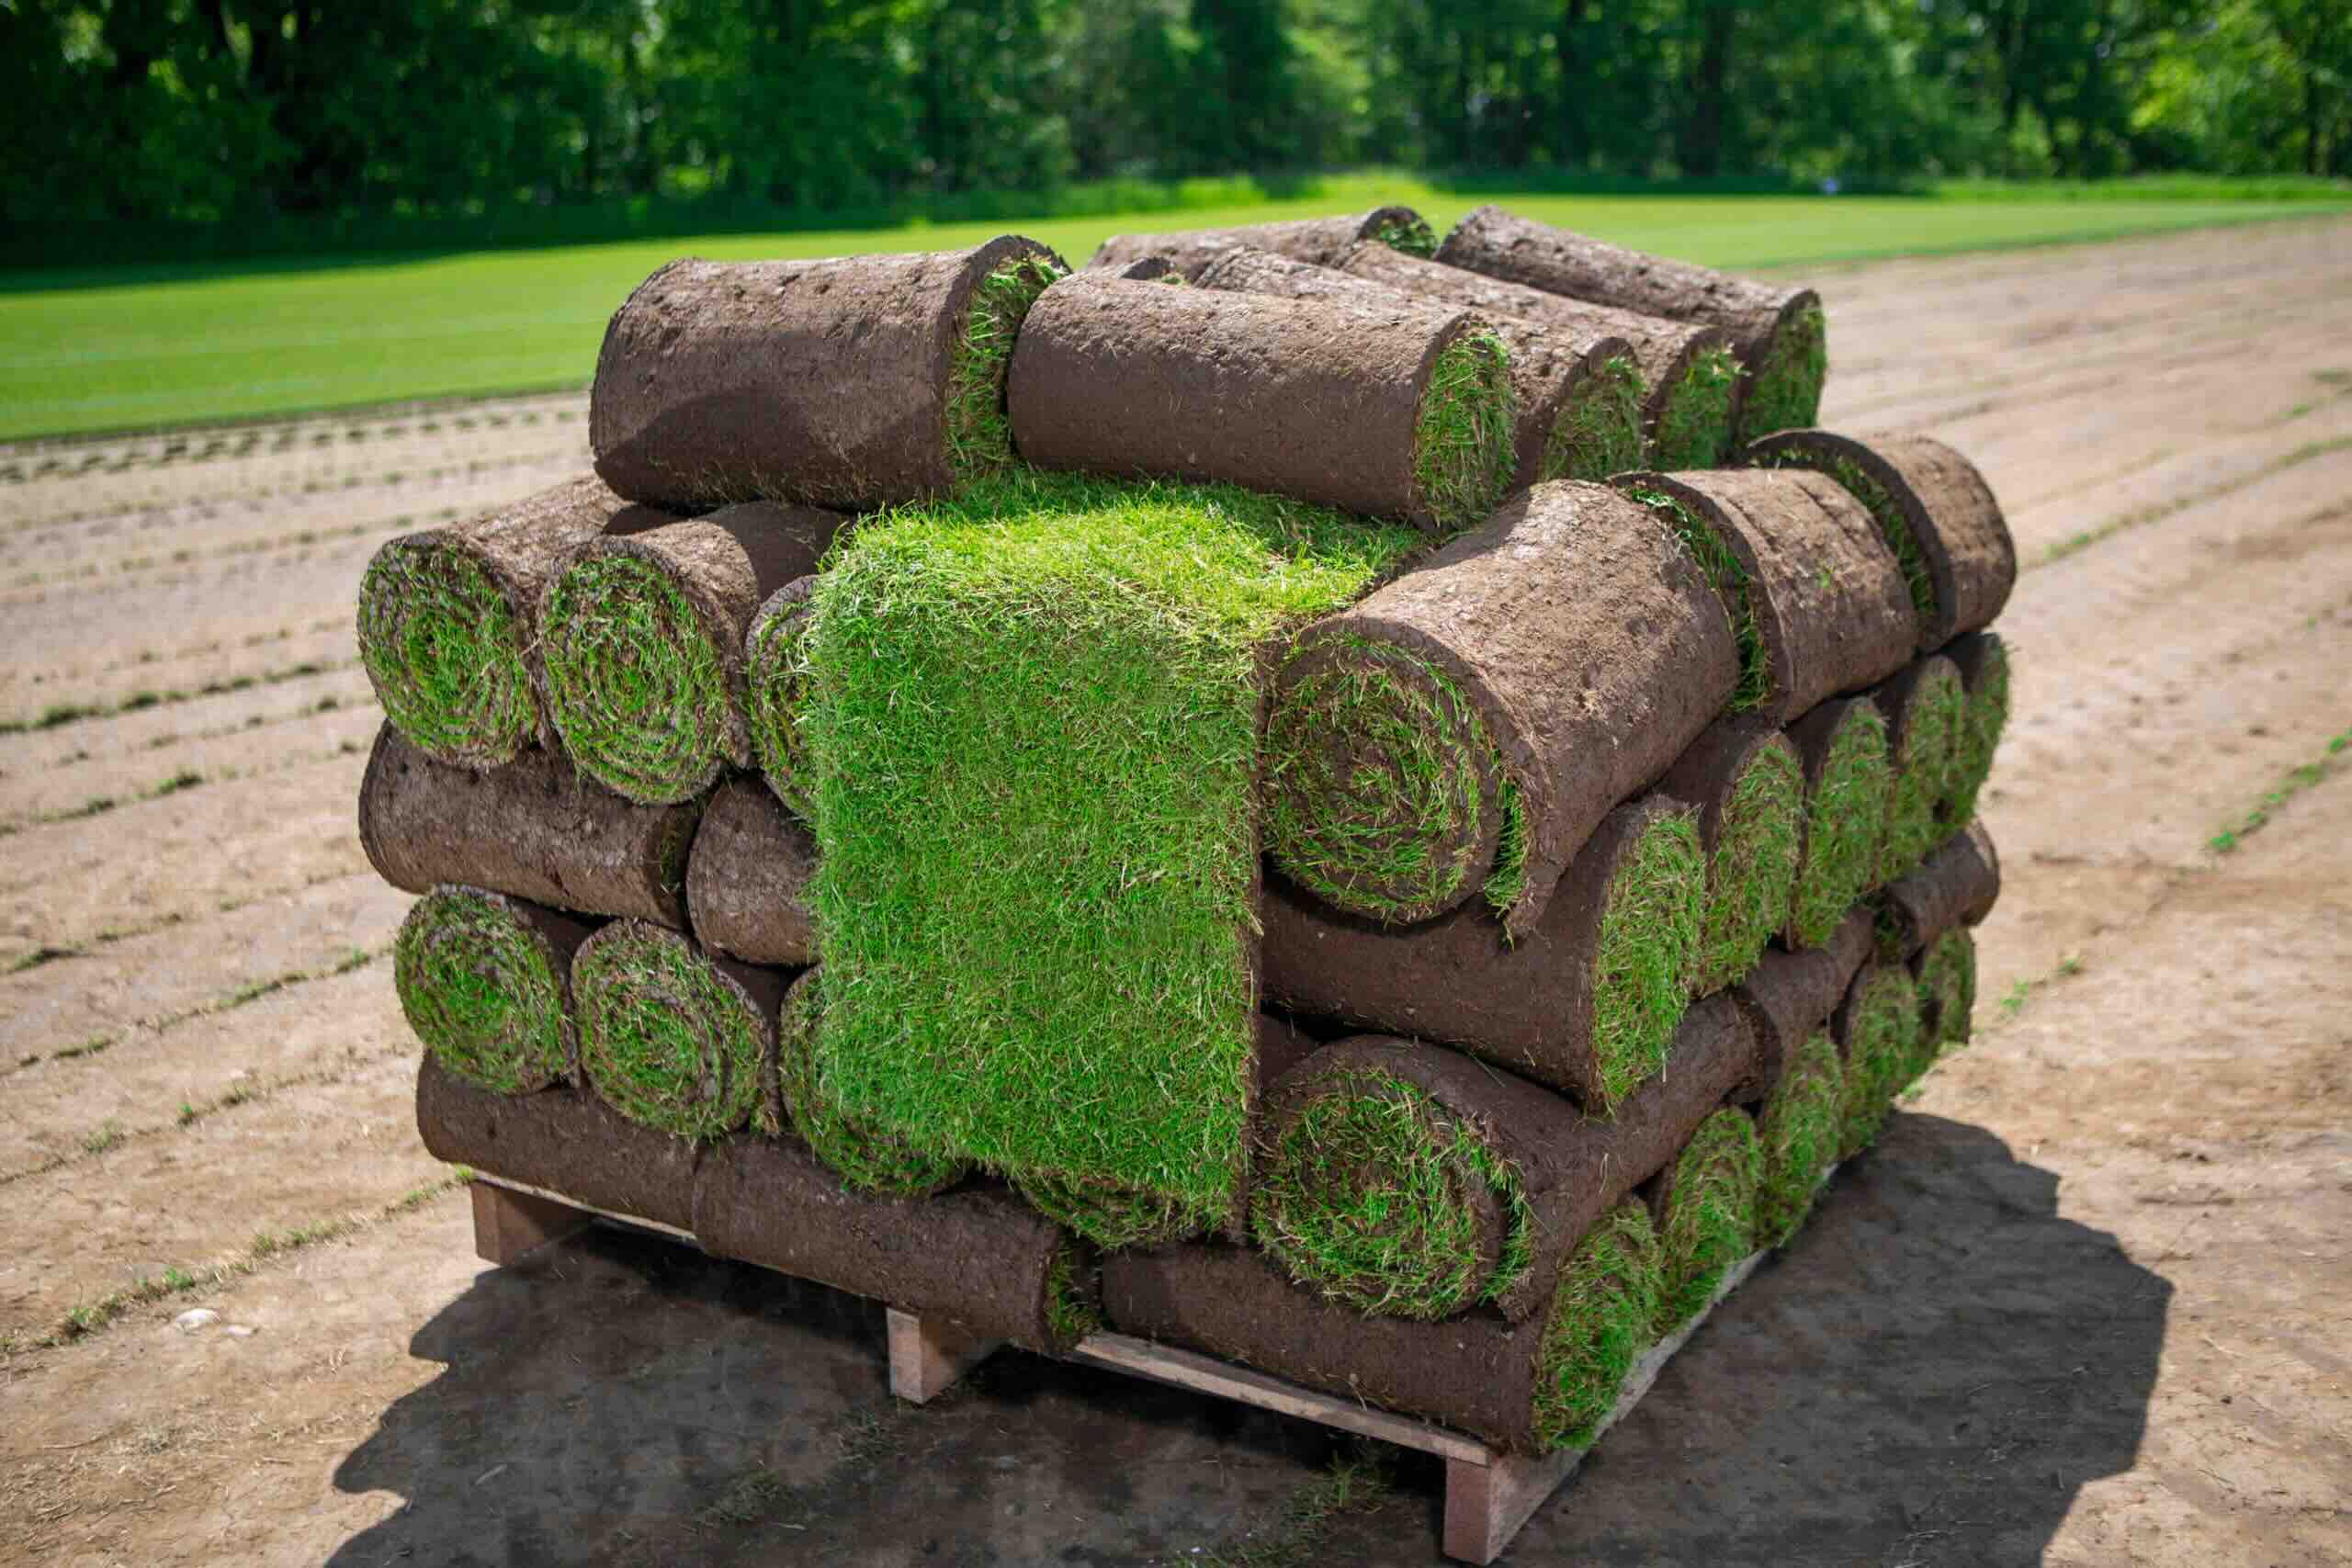 How Long Can Grass Stay On A Pallet